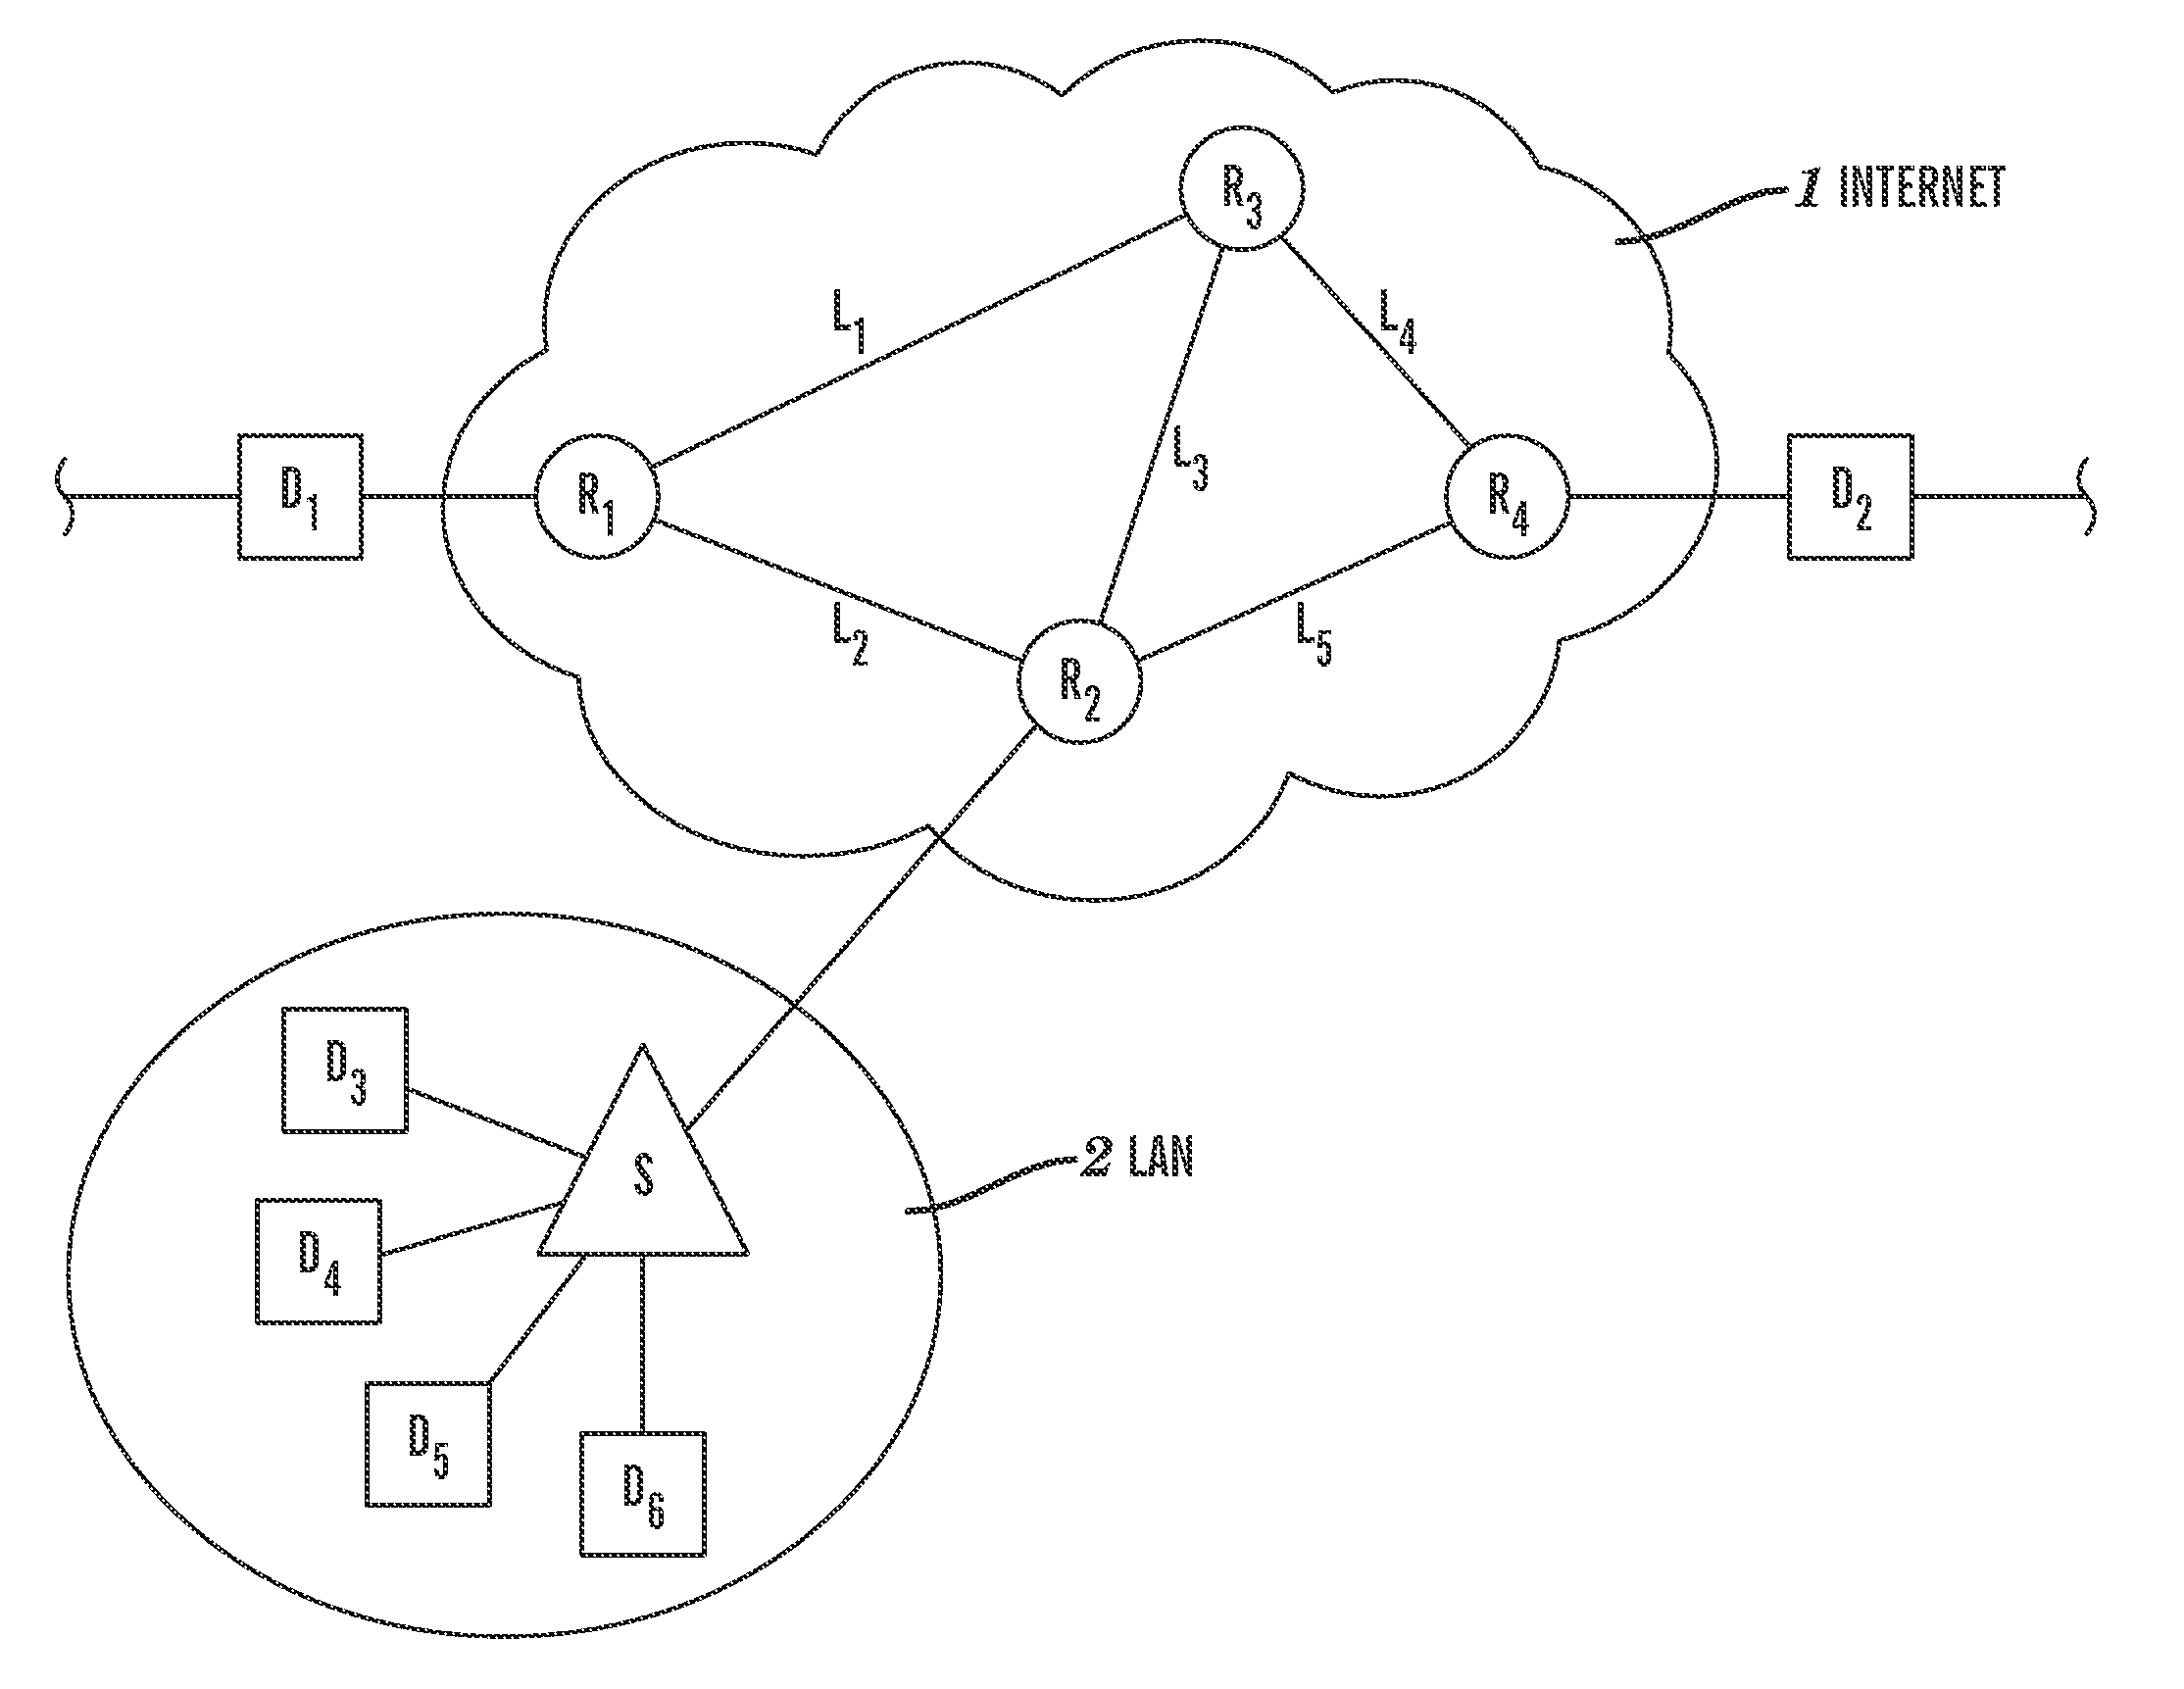 Modification of a switching table of an internet protocol switch